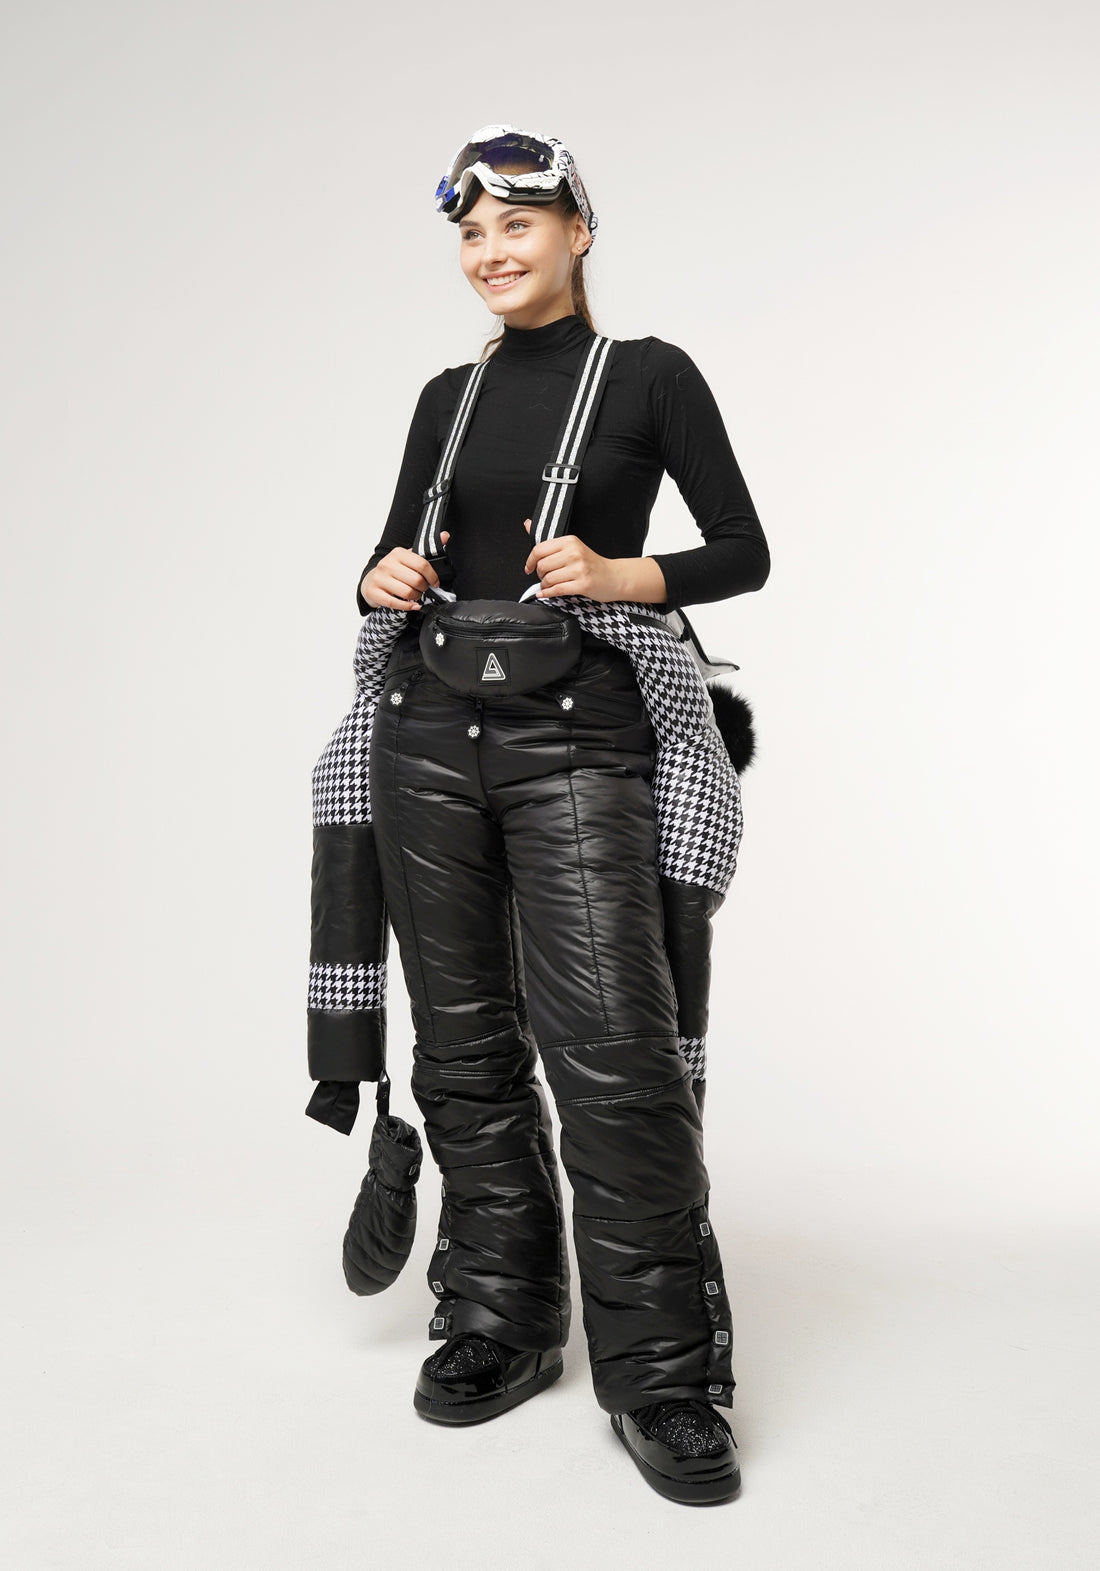 HOUNDSTOOTH INSERTS SKI SNOW SUIT ELBERT - WINTER WARM JUMPSUIT WITH MITTENS AND BAG